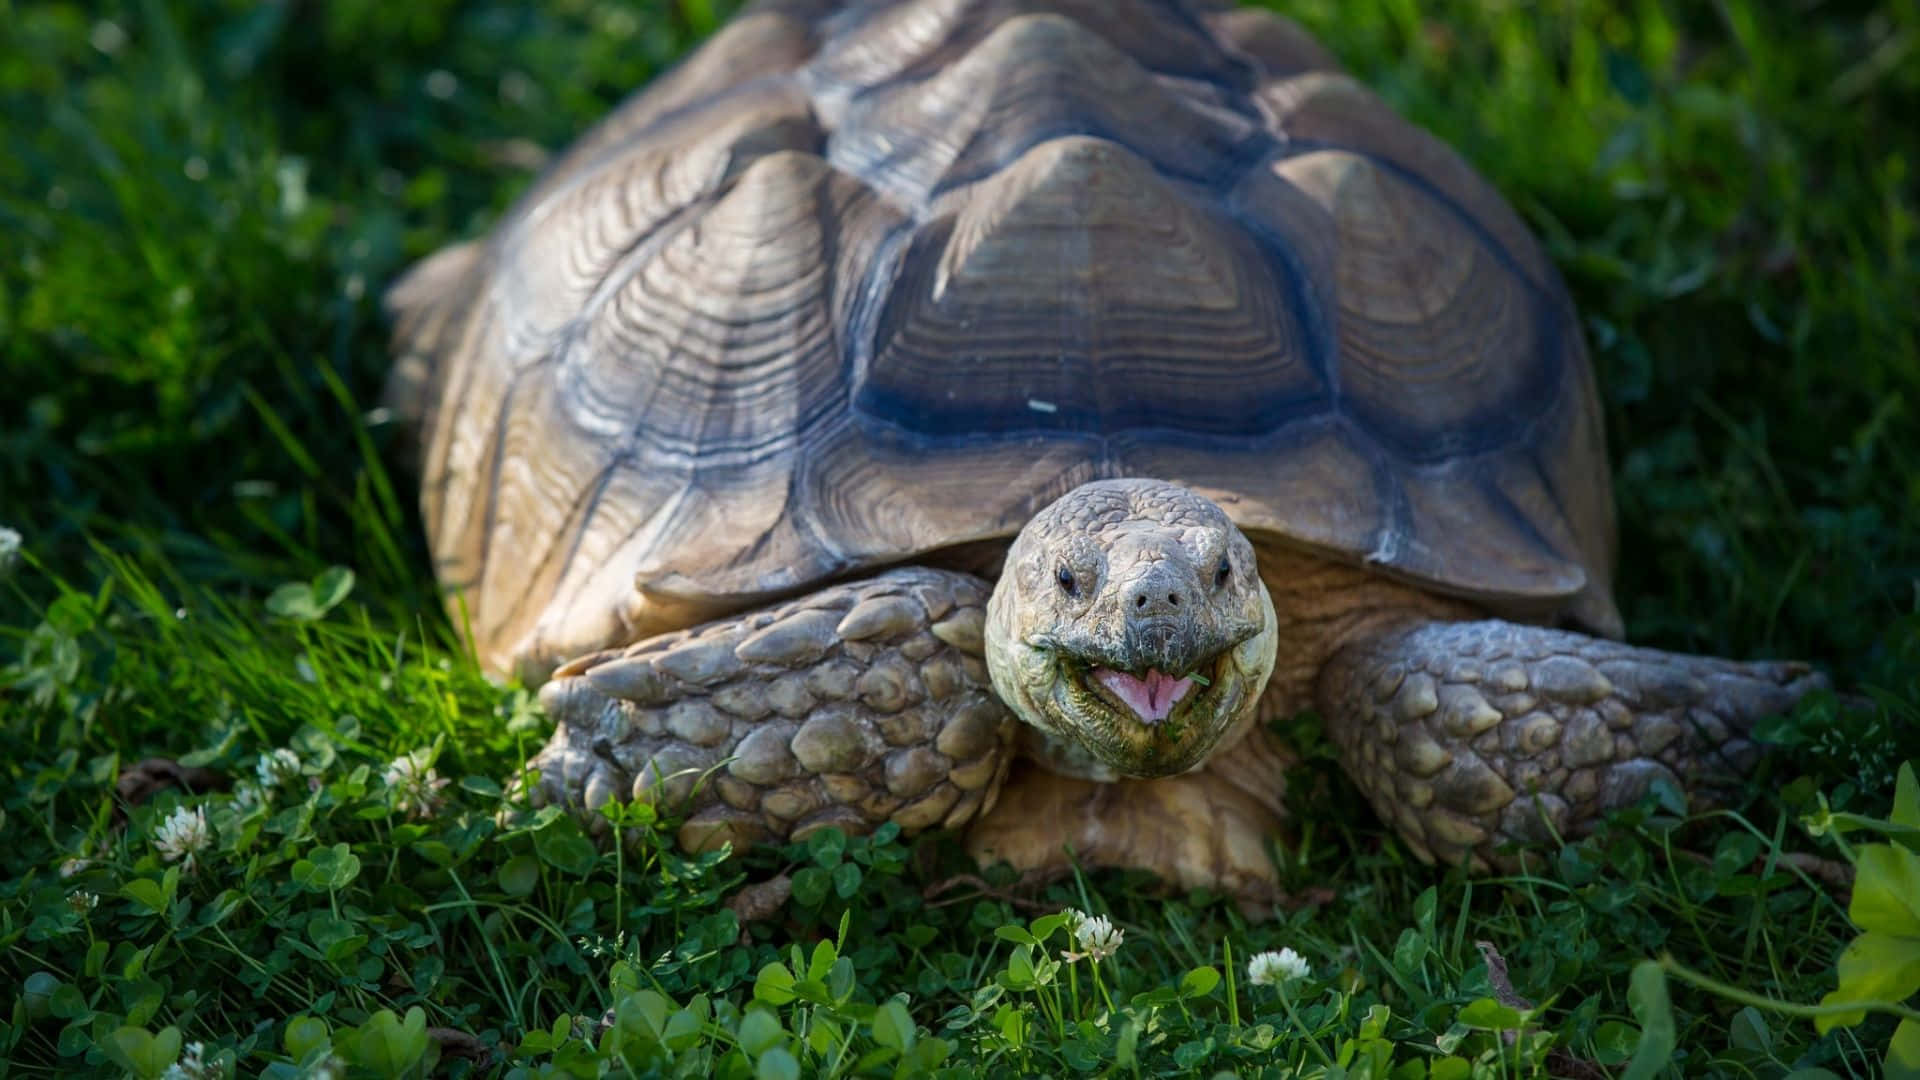 A Tortoise Is Sitting On The Grass